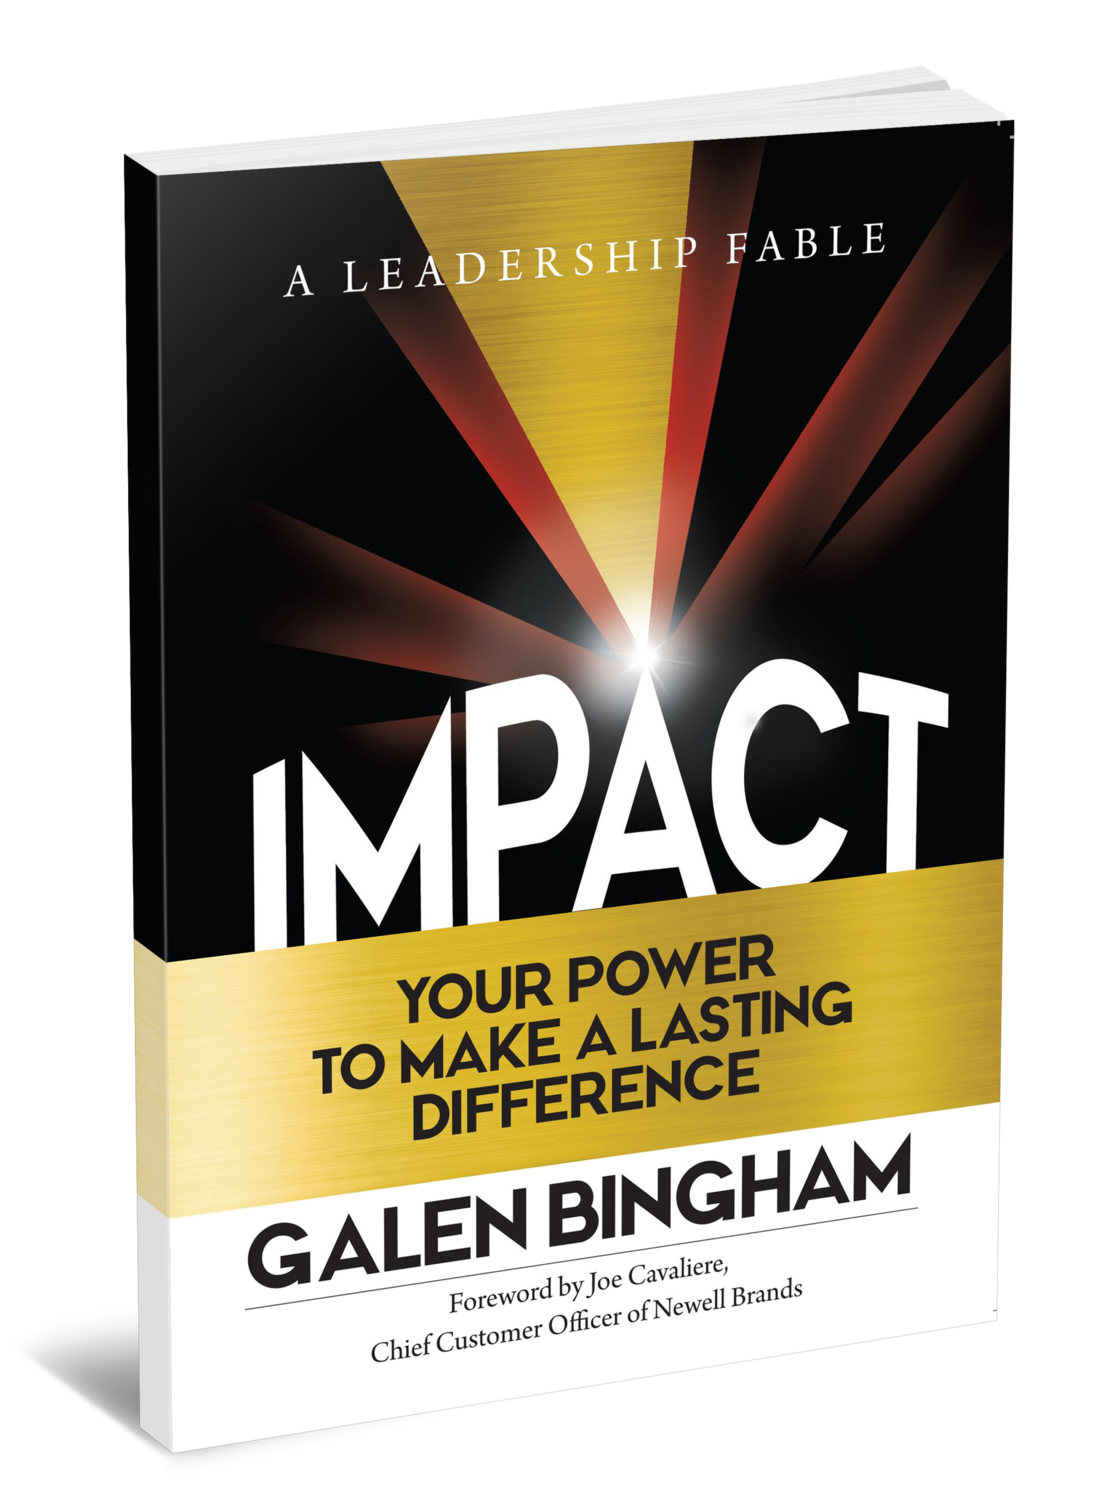 IMPACT: A Leadership Fable: Your Power To Make A Lasting Difference